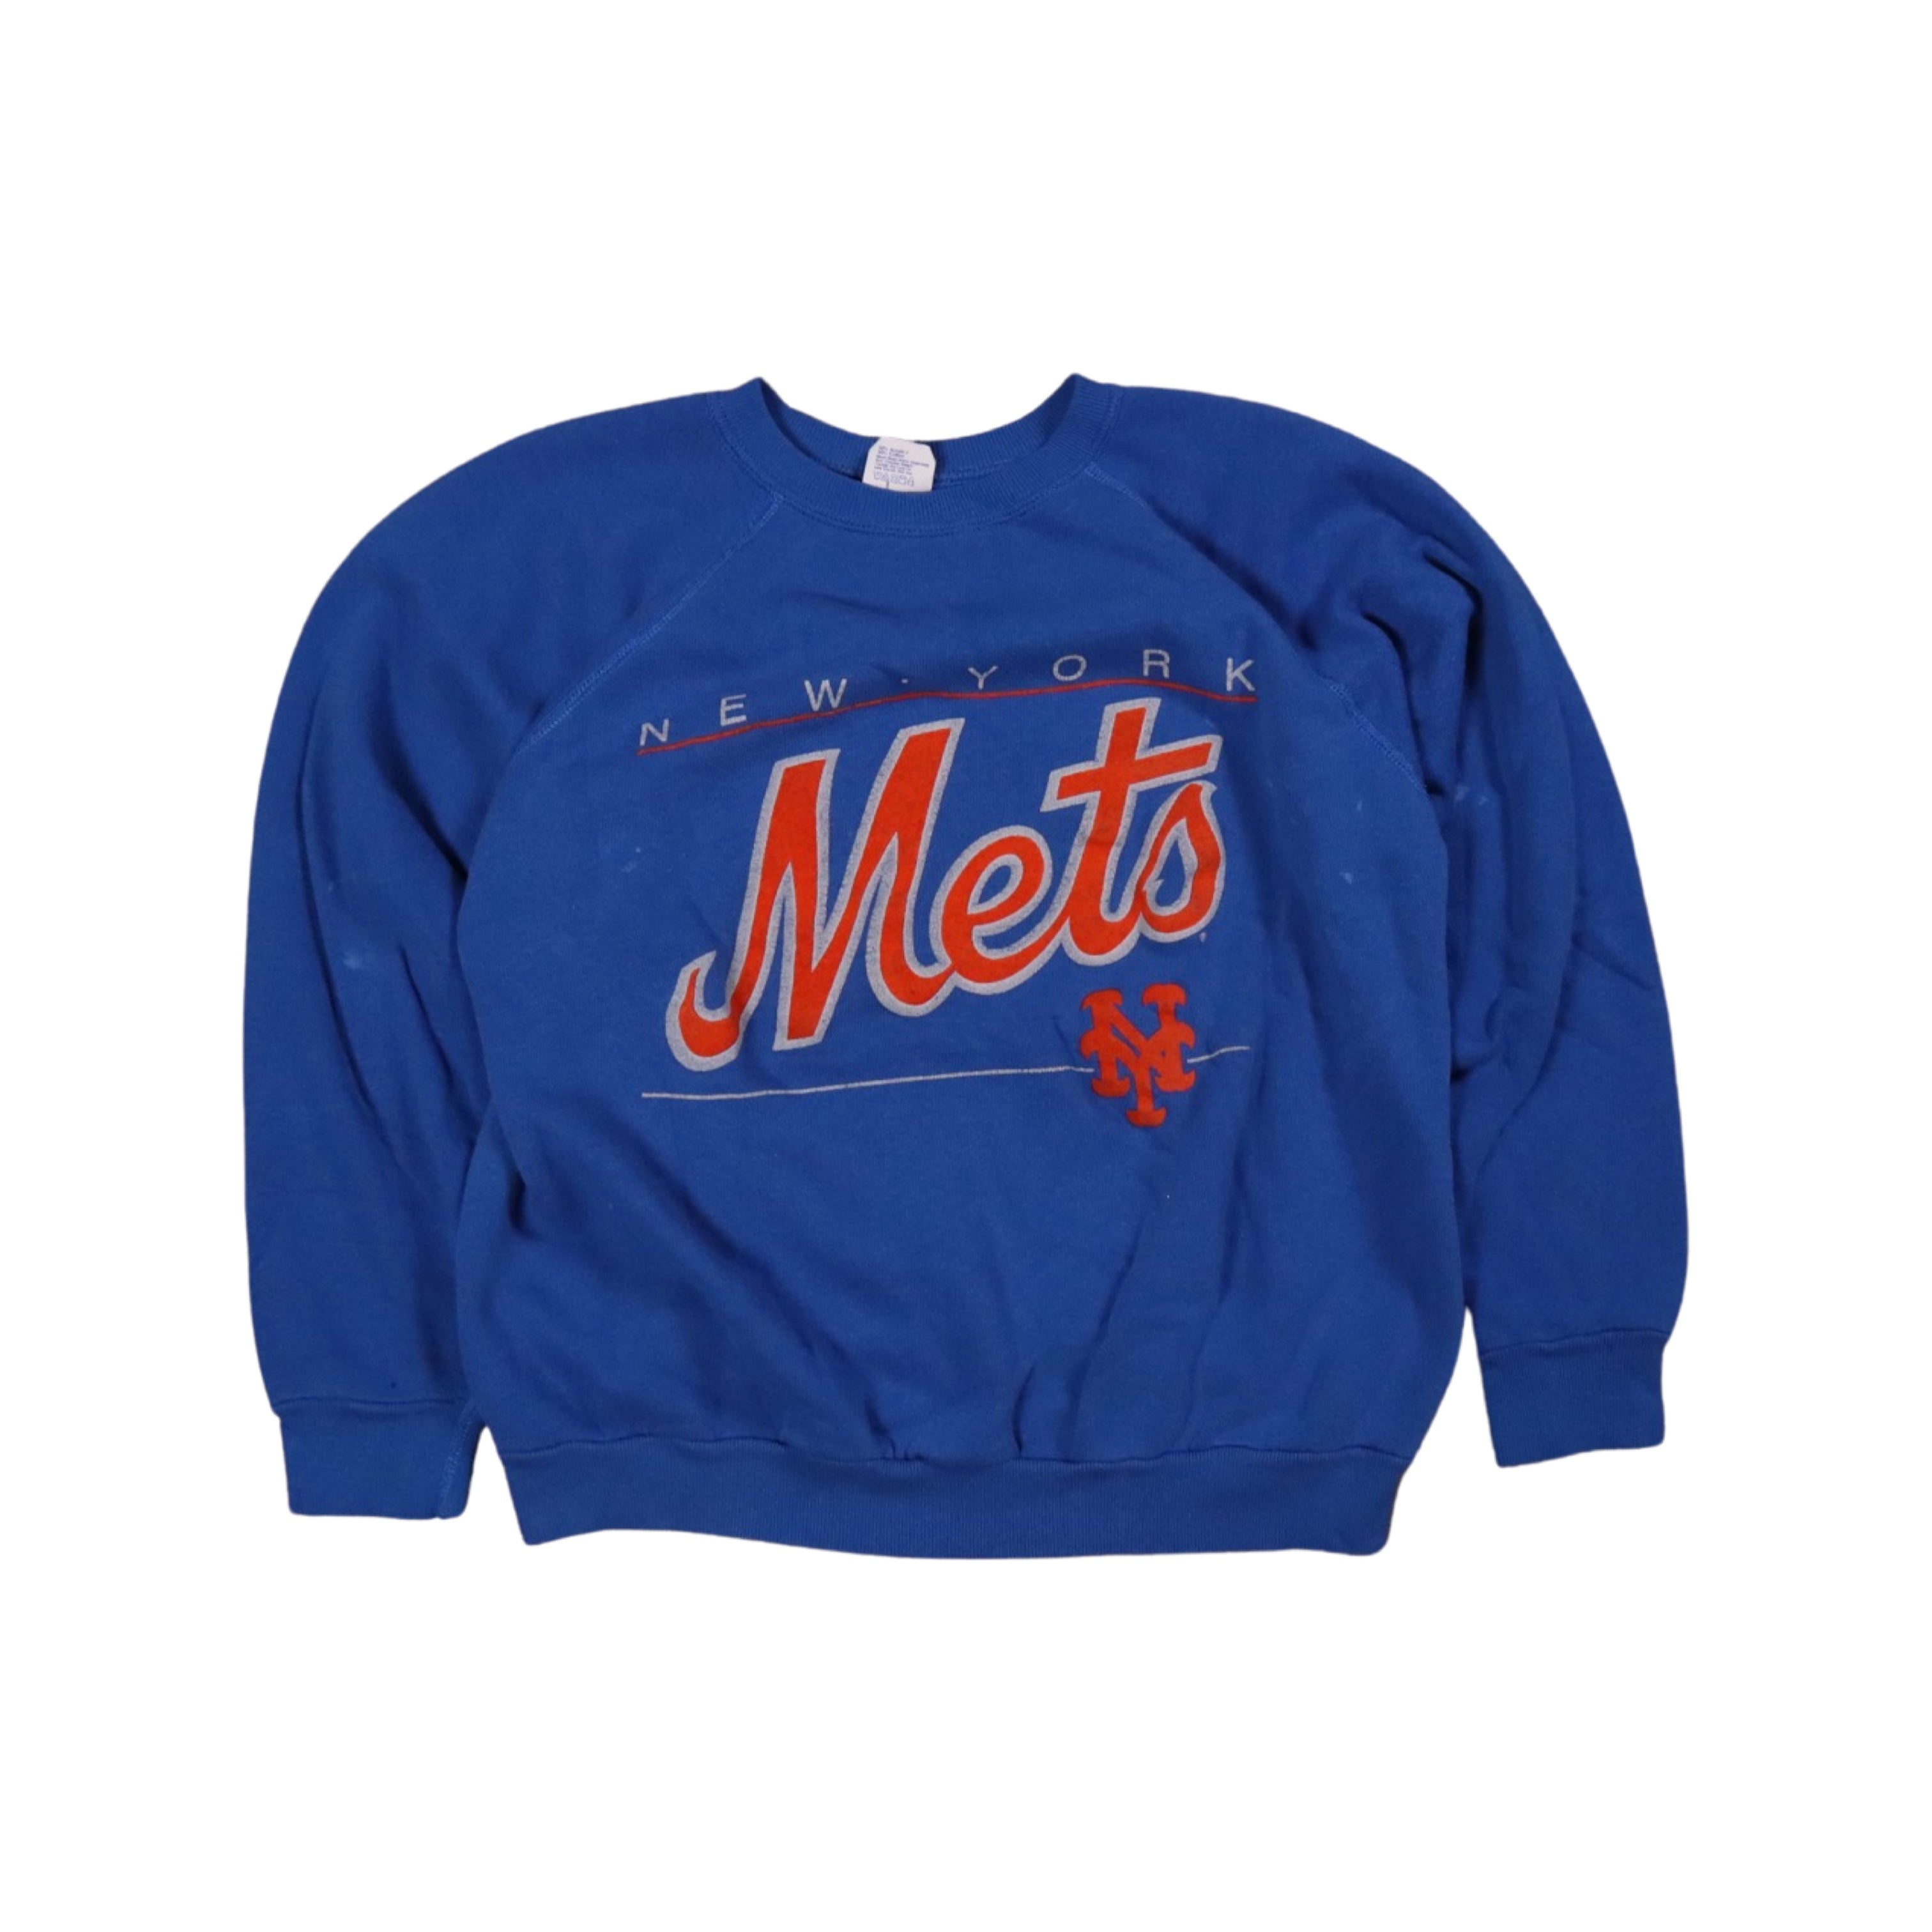 New York Mets 80s Sweater (Small)